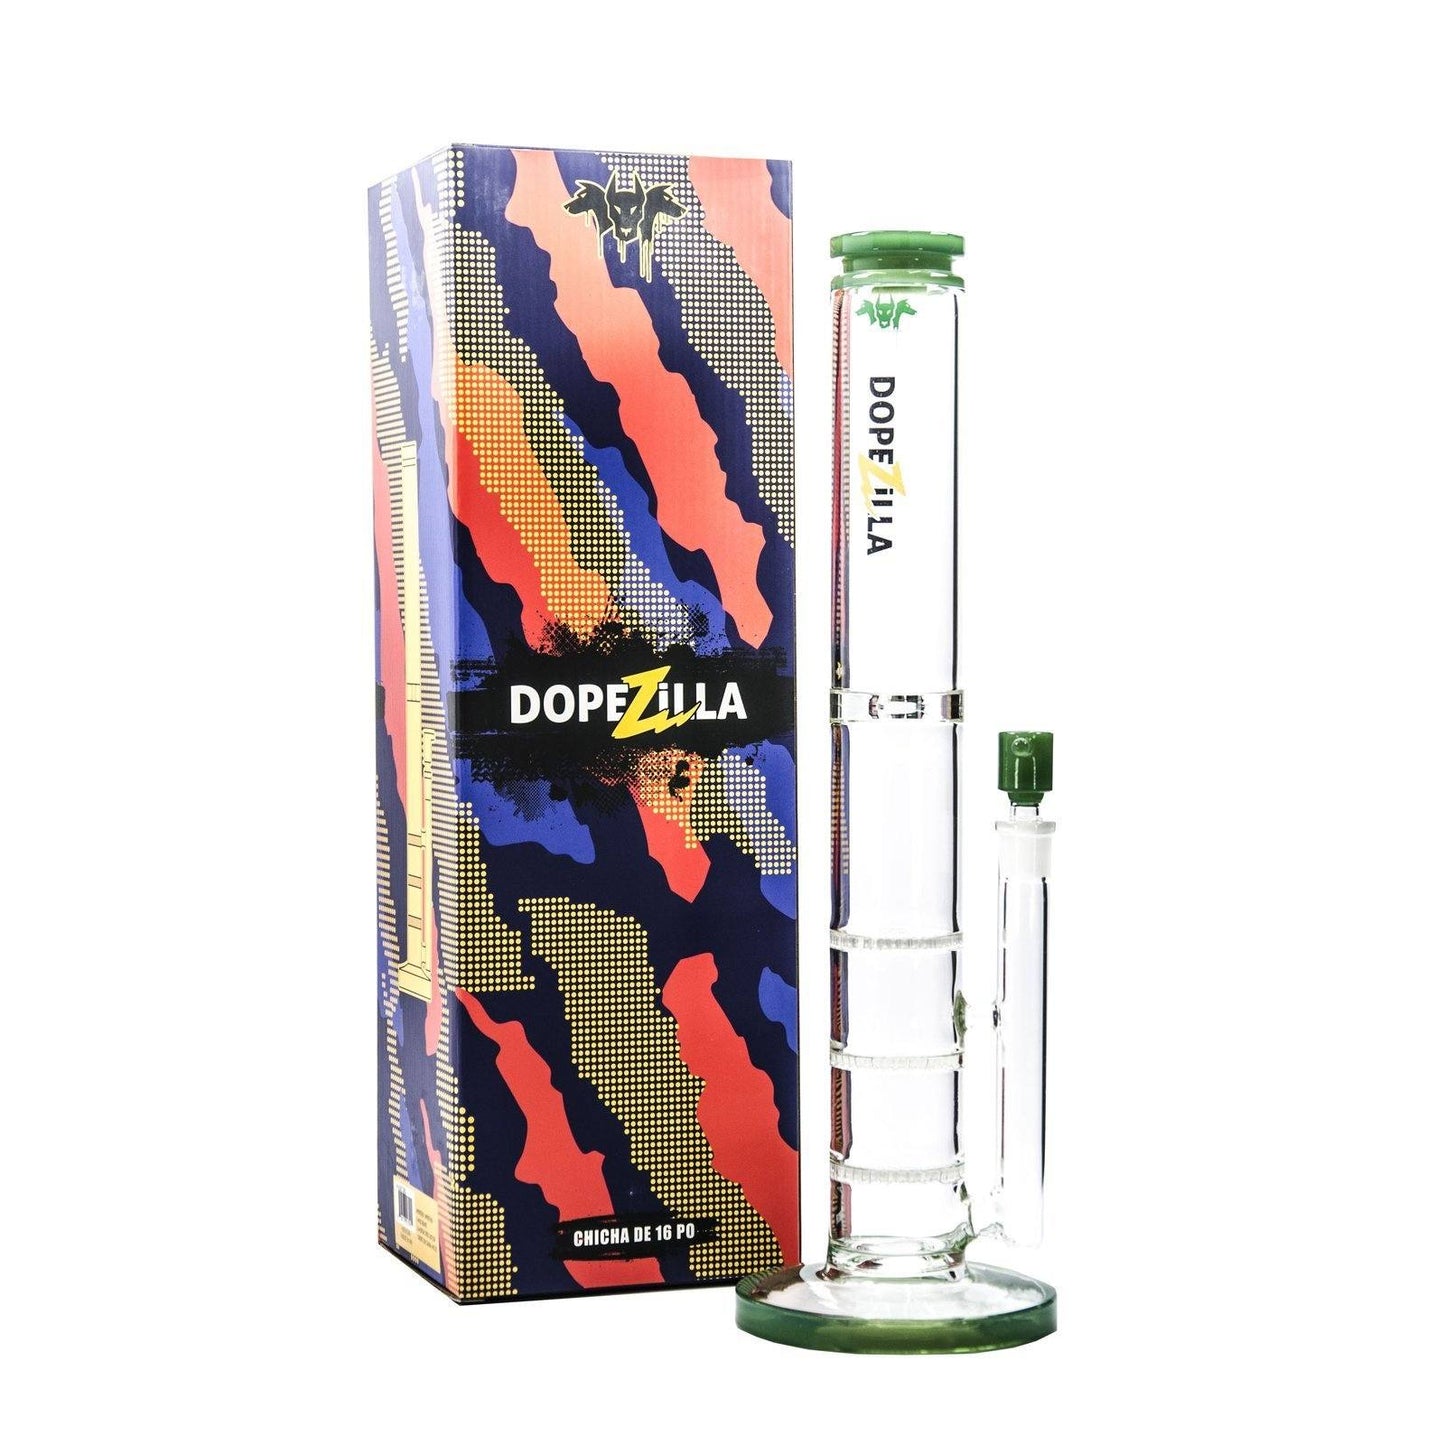 Dopezilla-Cerberus-Water Pipe-16 Inch-Various Colors-1 Count Flower Power Packages 